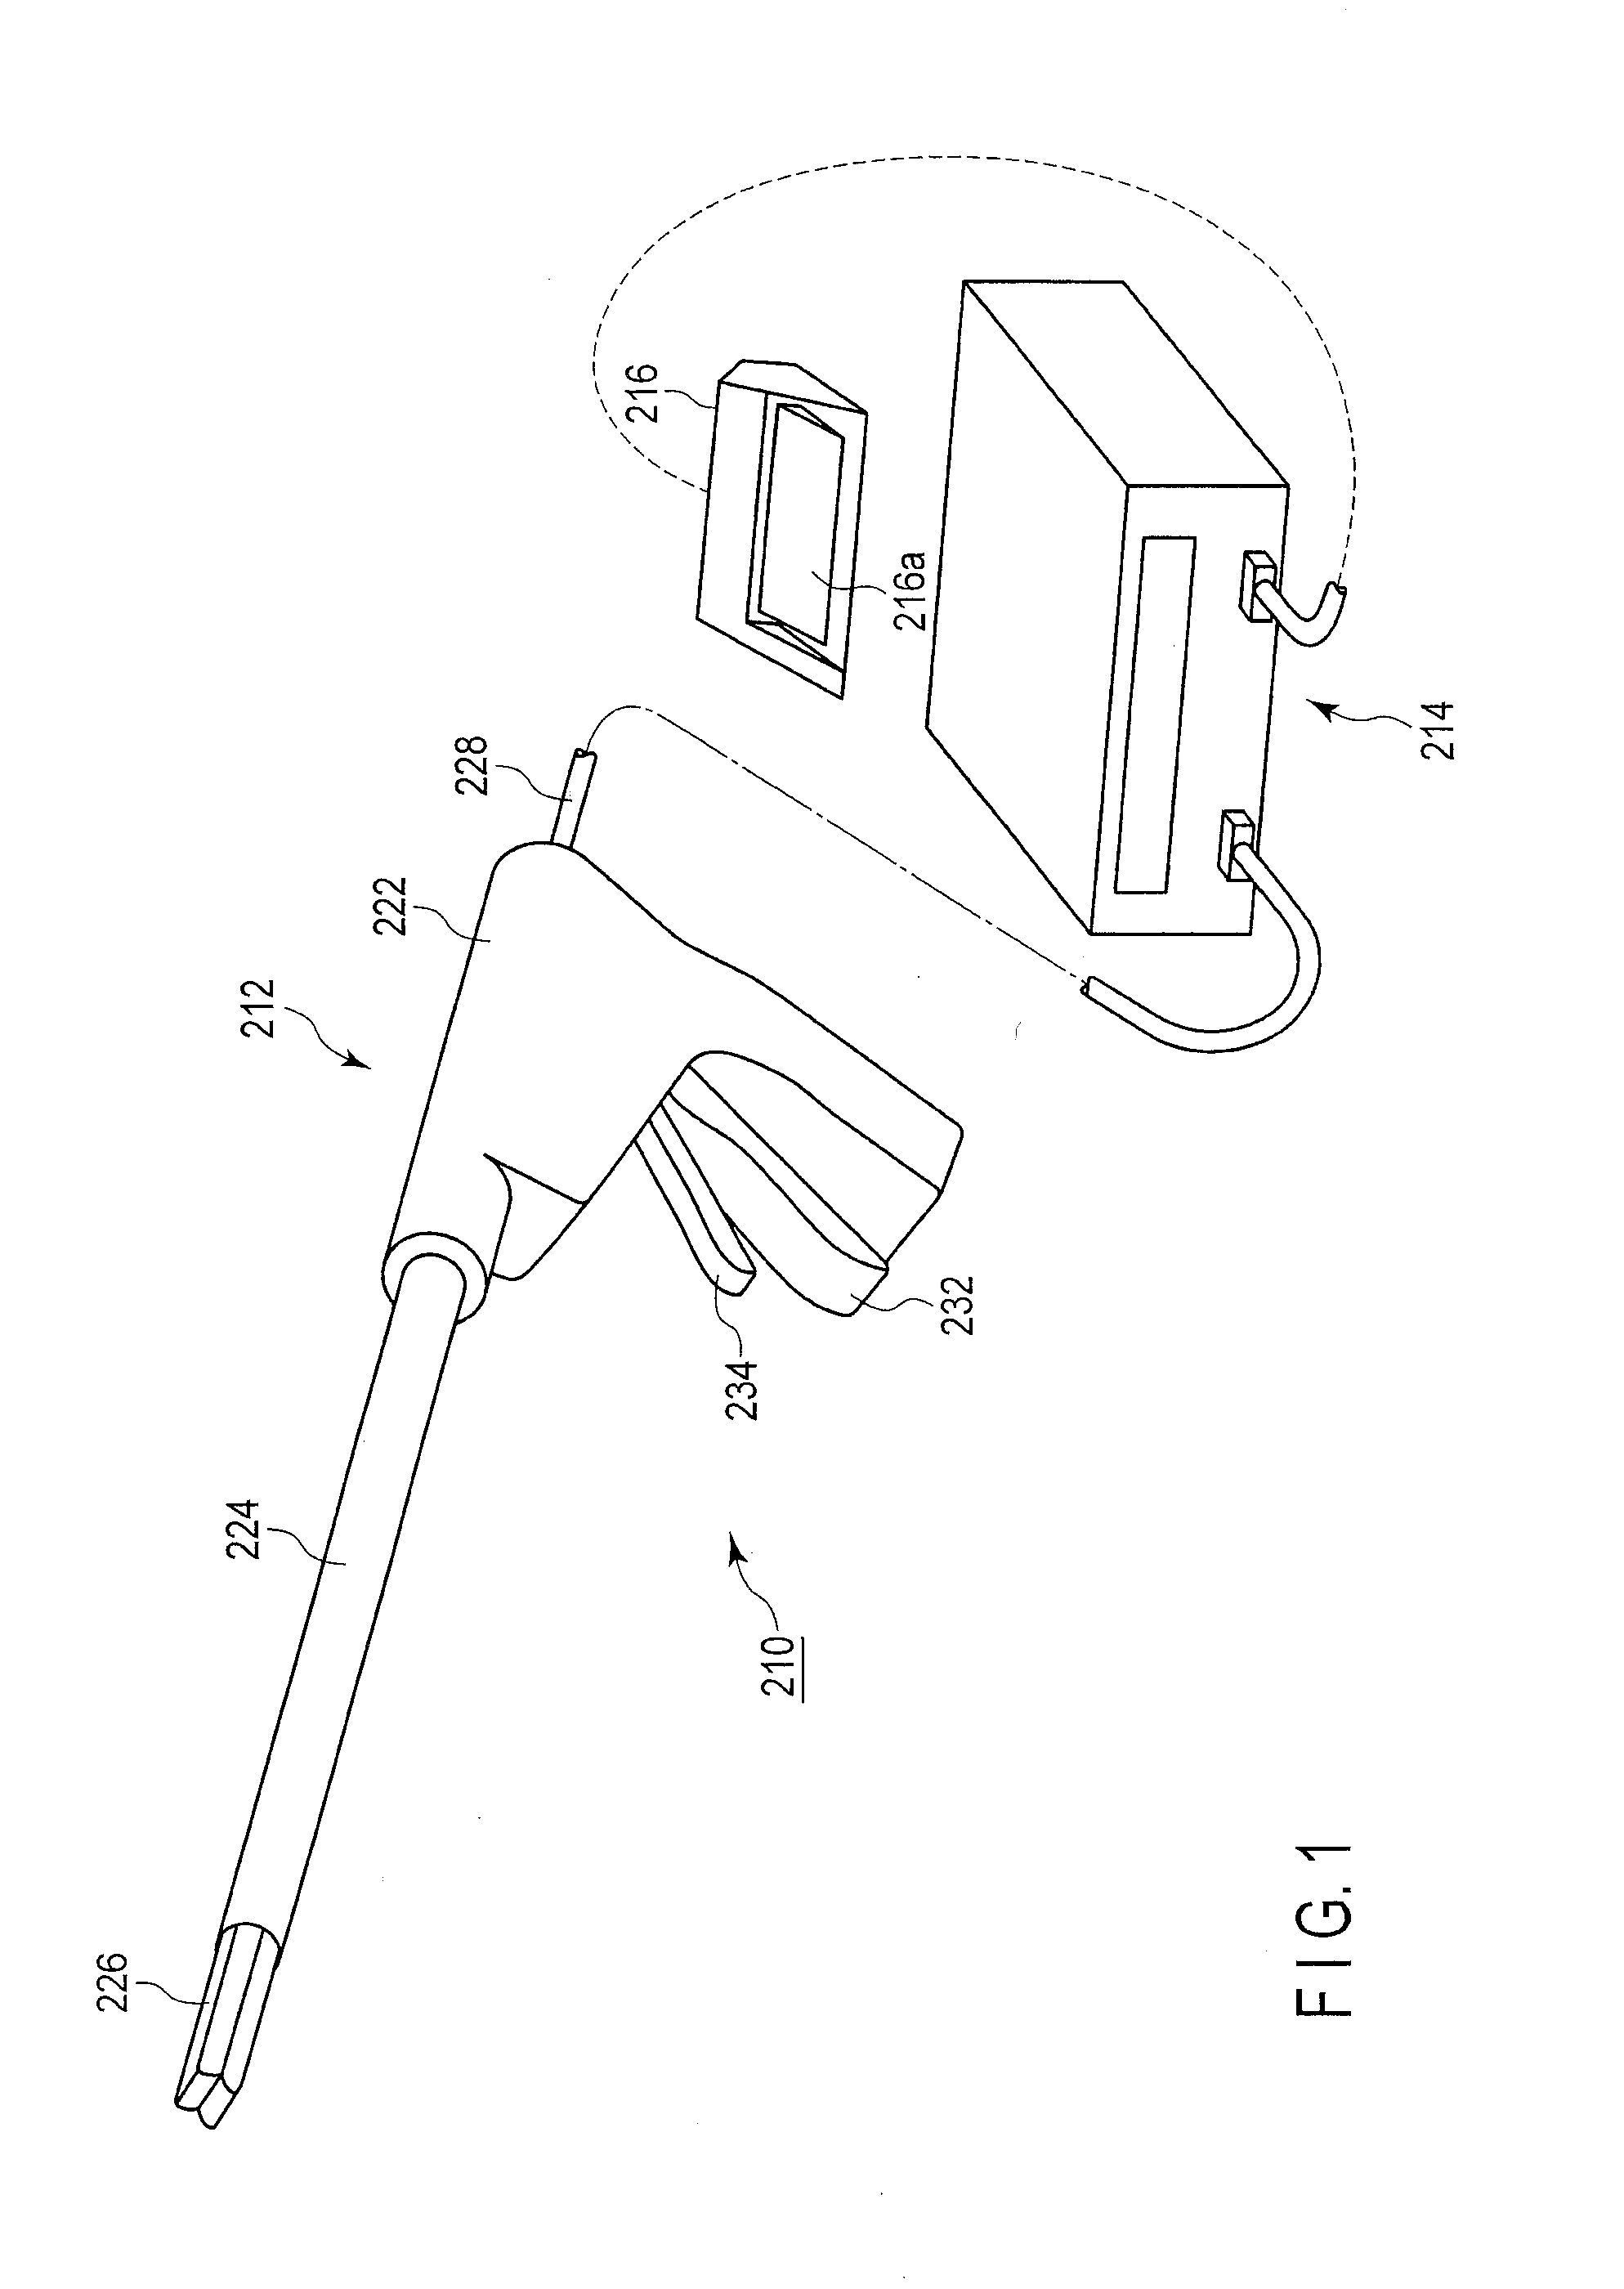 Surgical treatment system